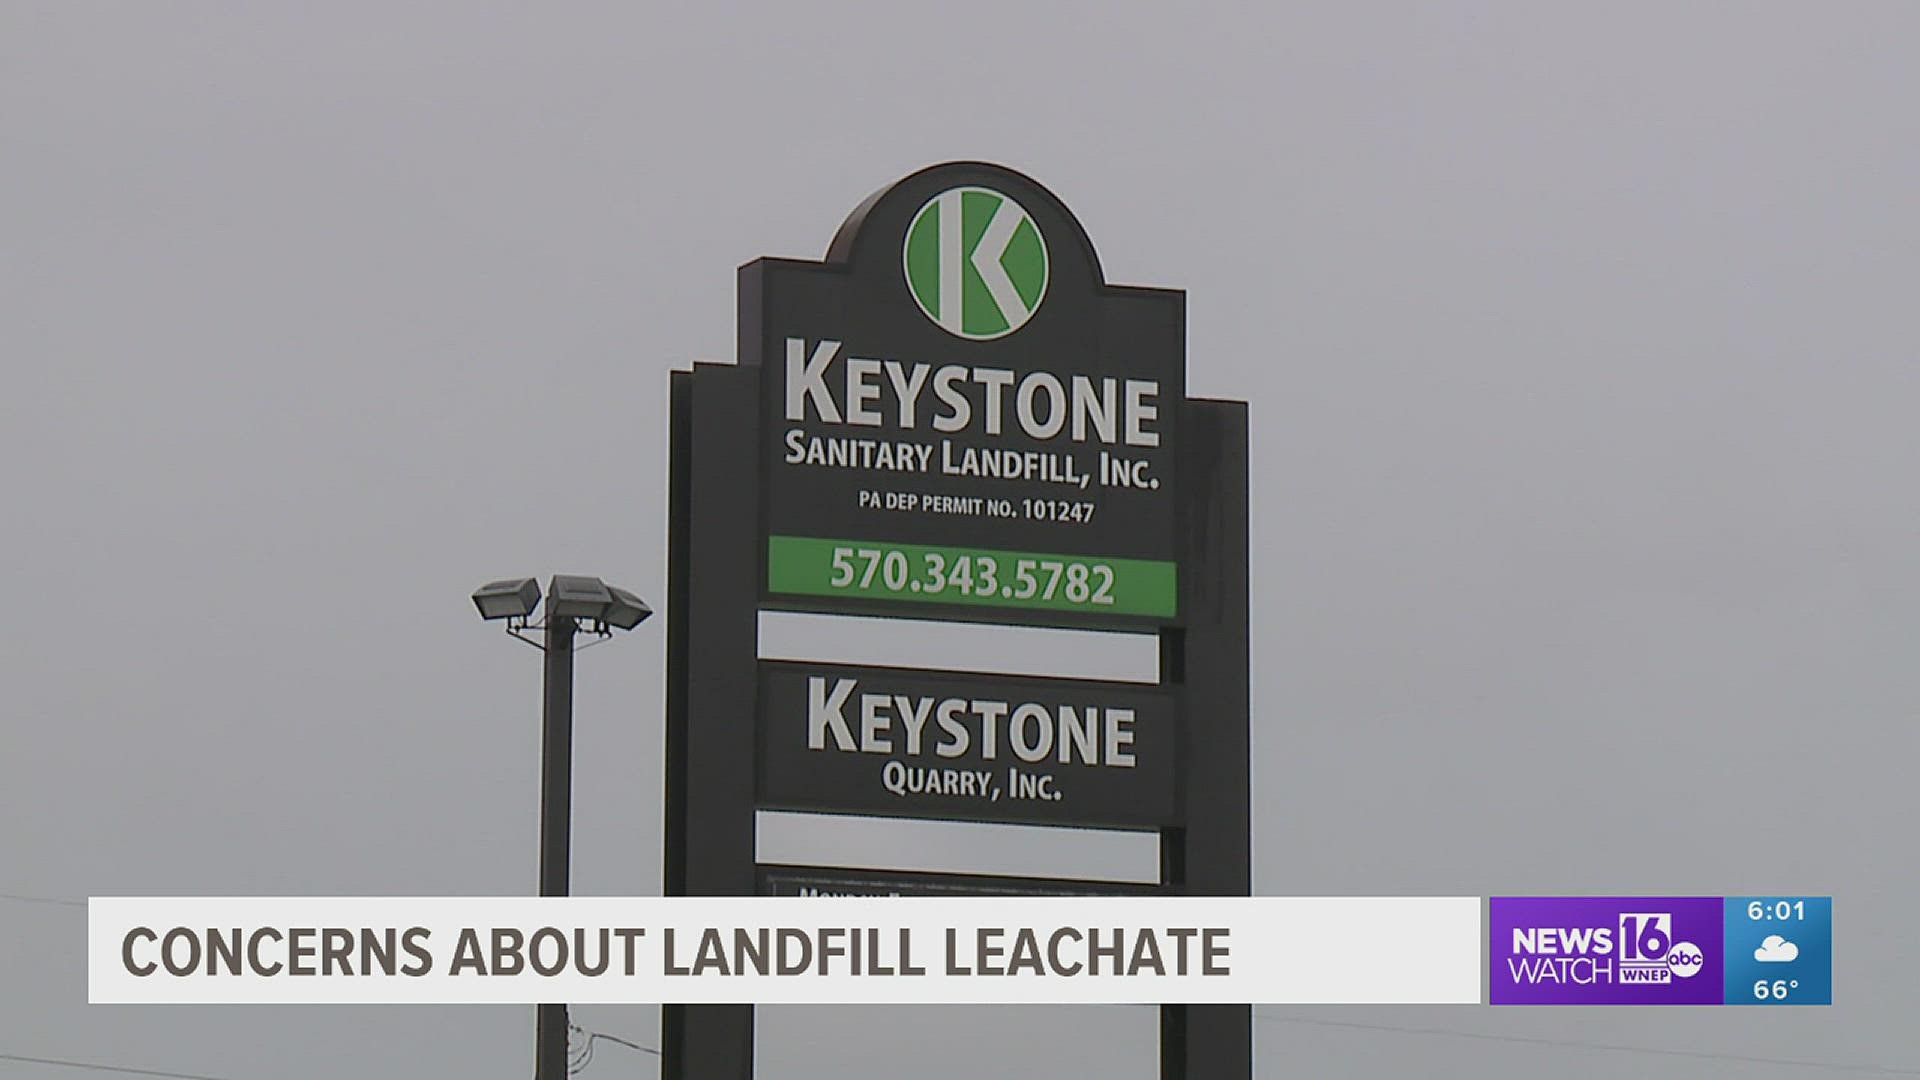 If approved, the Keystone Landfill in Lackawanna County can treat up to 200,000 gallons of leachate a day and discharge it directly into a creek.